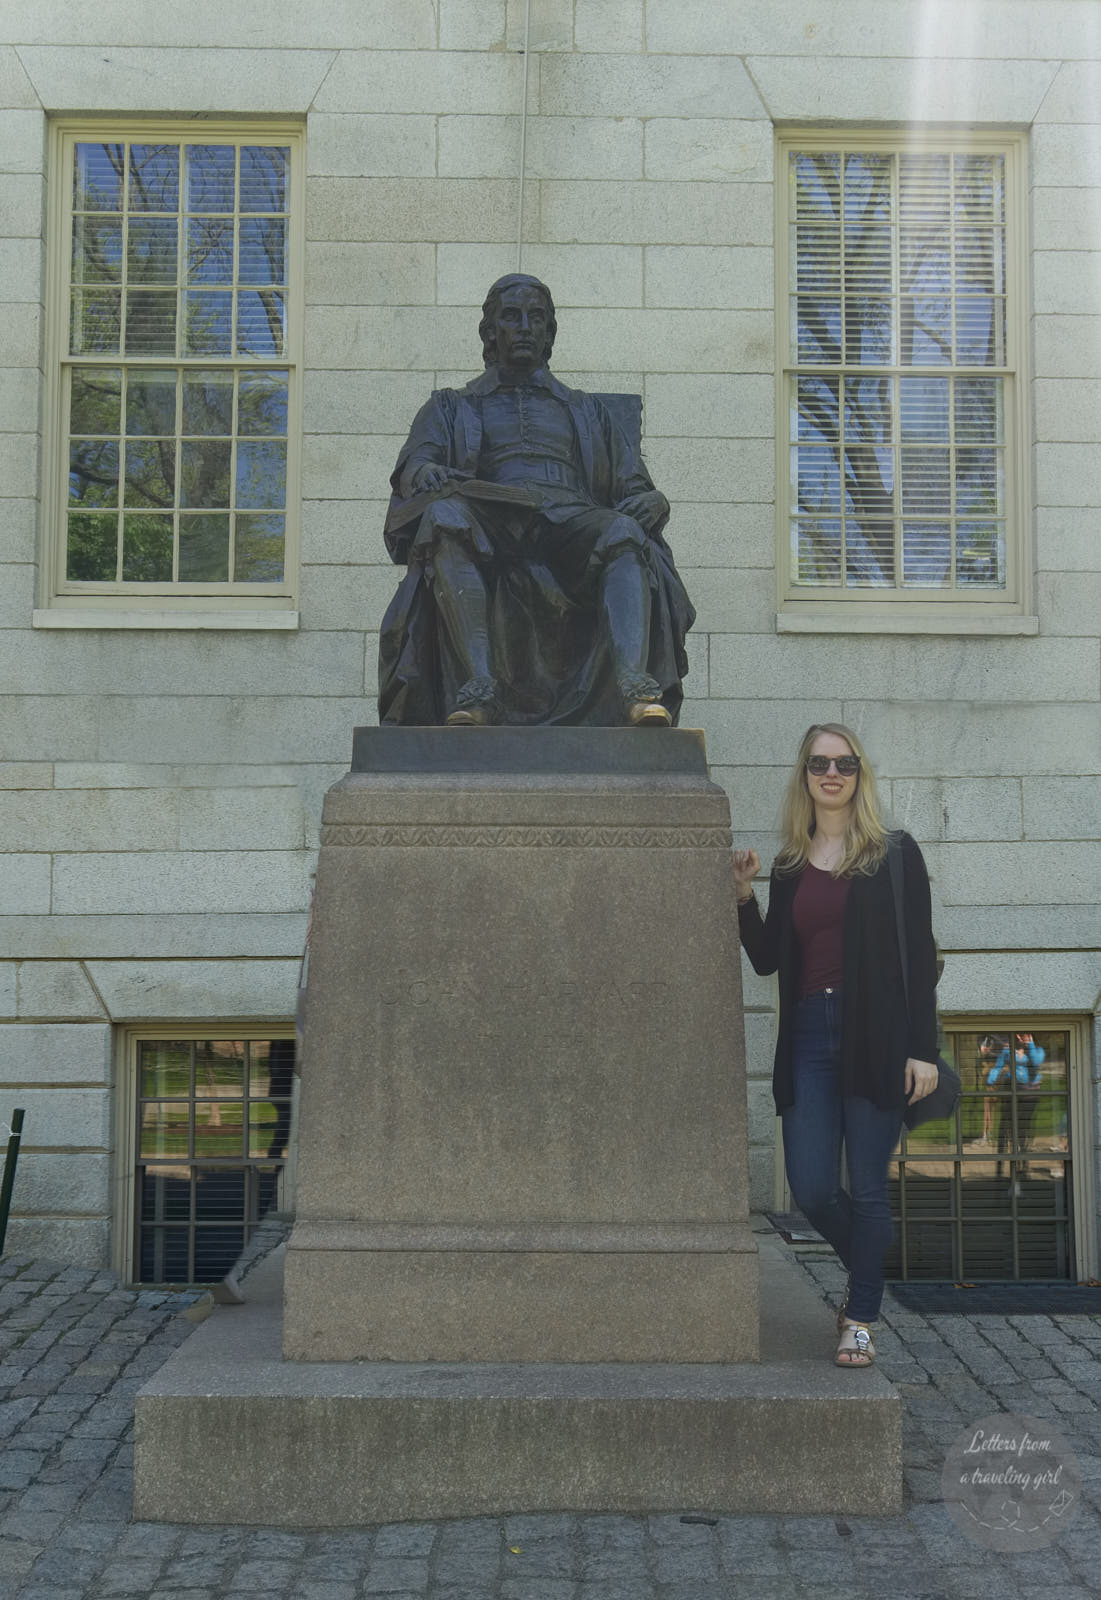 Statue of founder of Harvard and me standing next to it